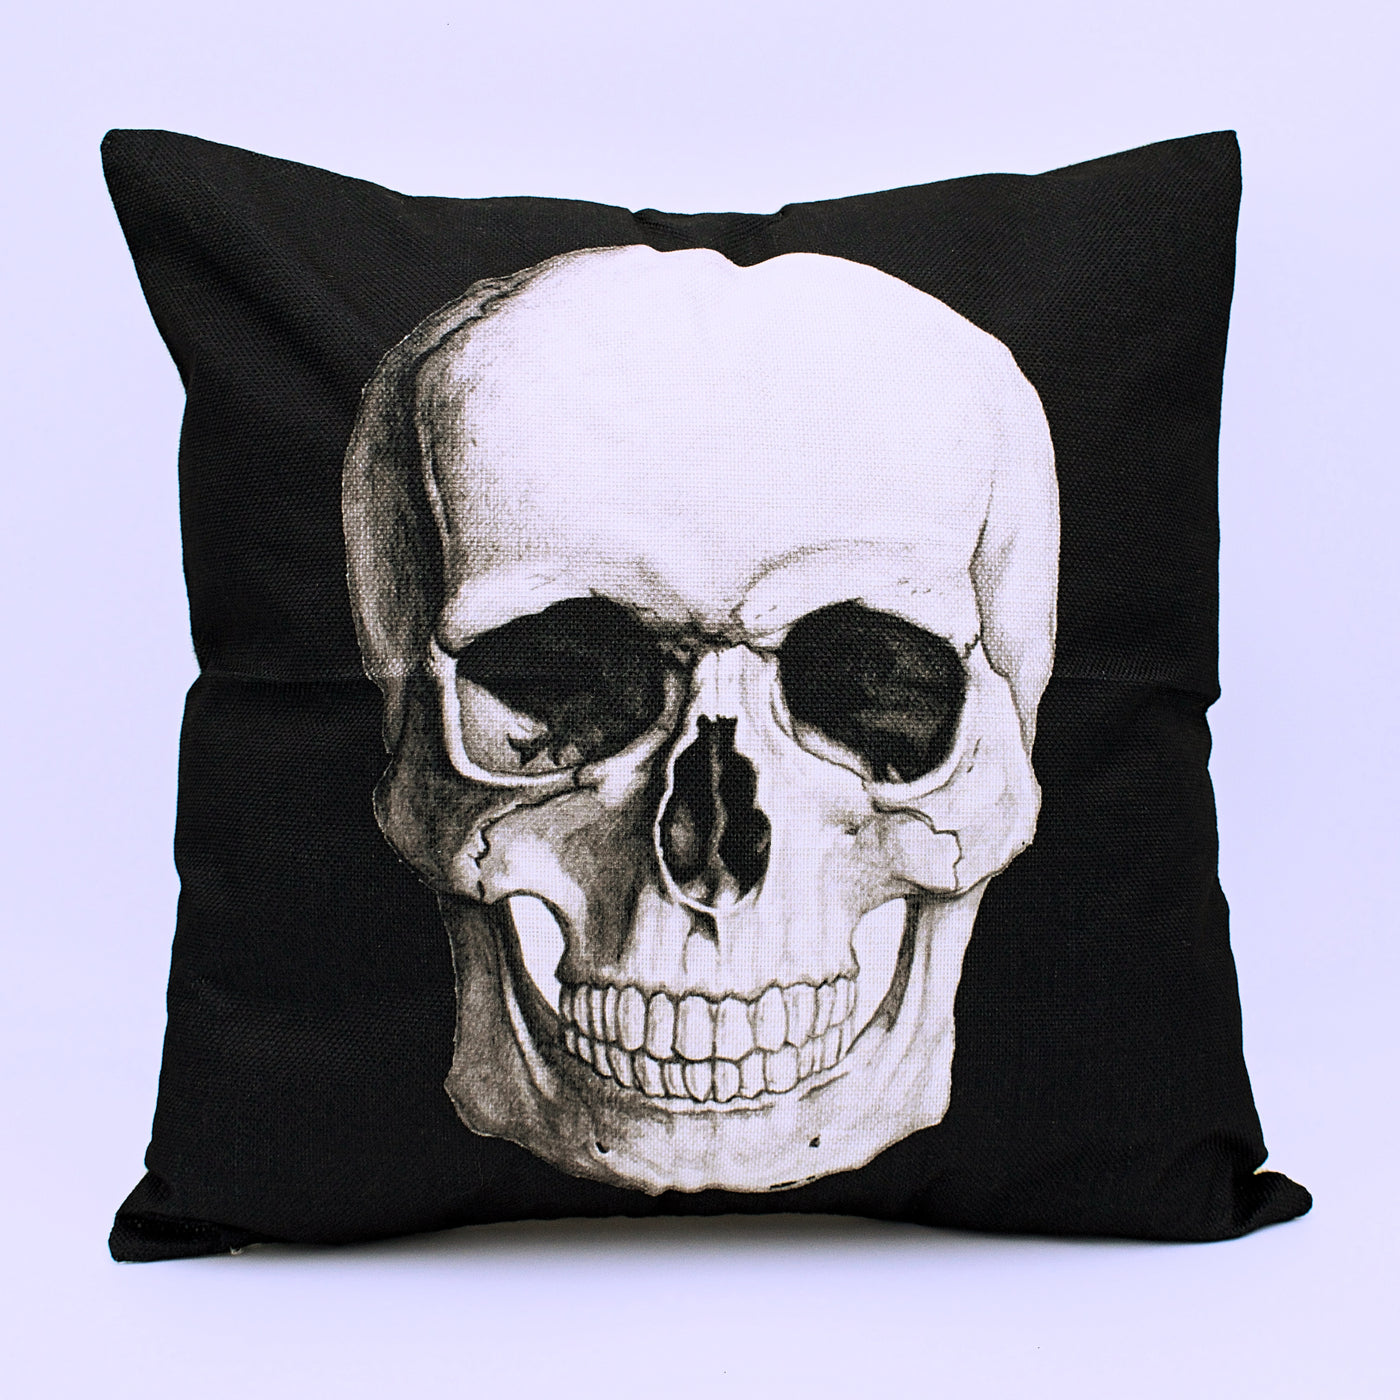 Skull Throw Pillow Cover with Insert - The Cranio Collections